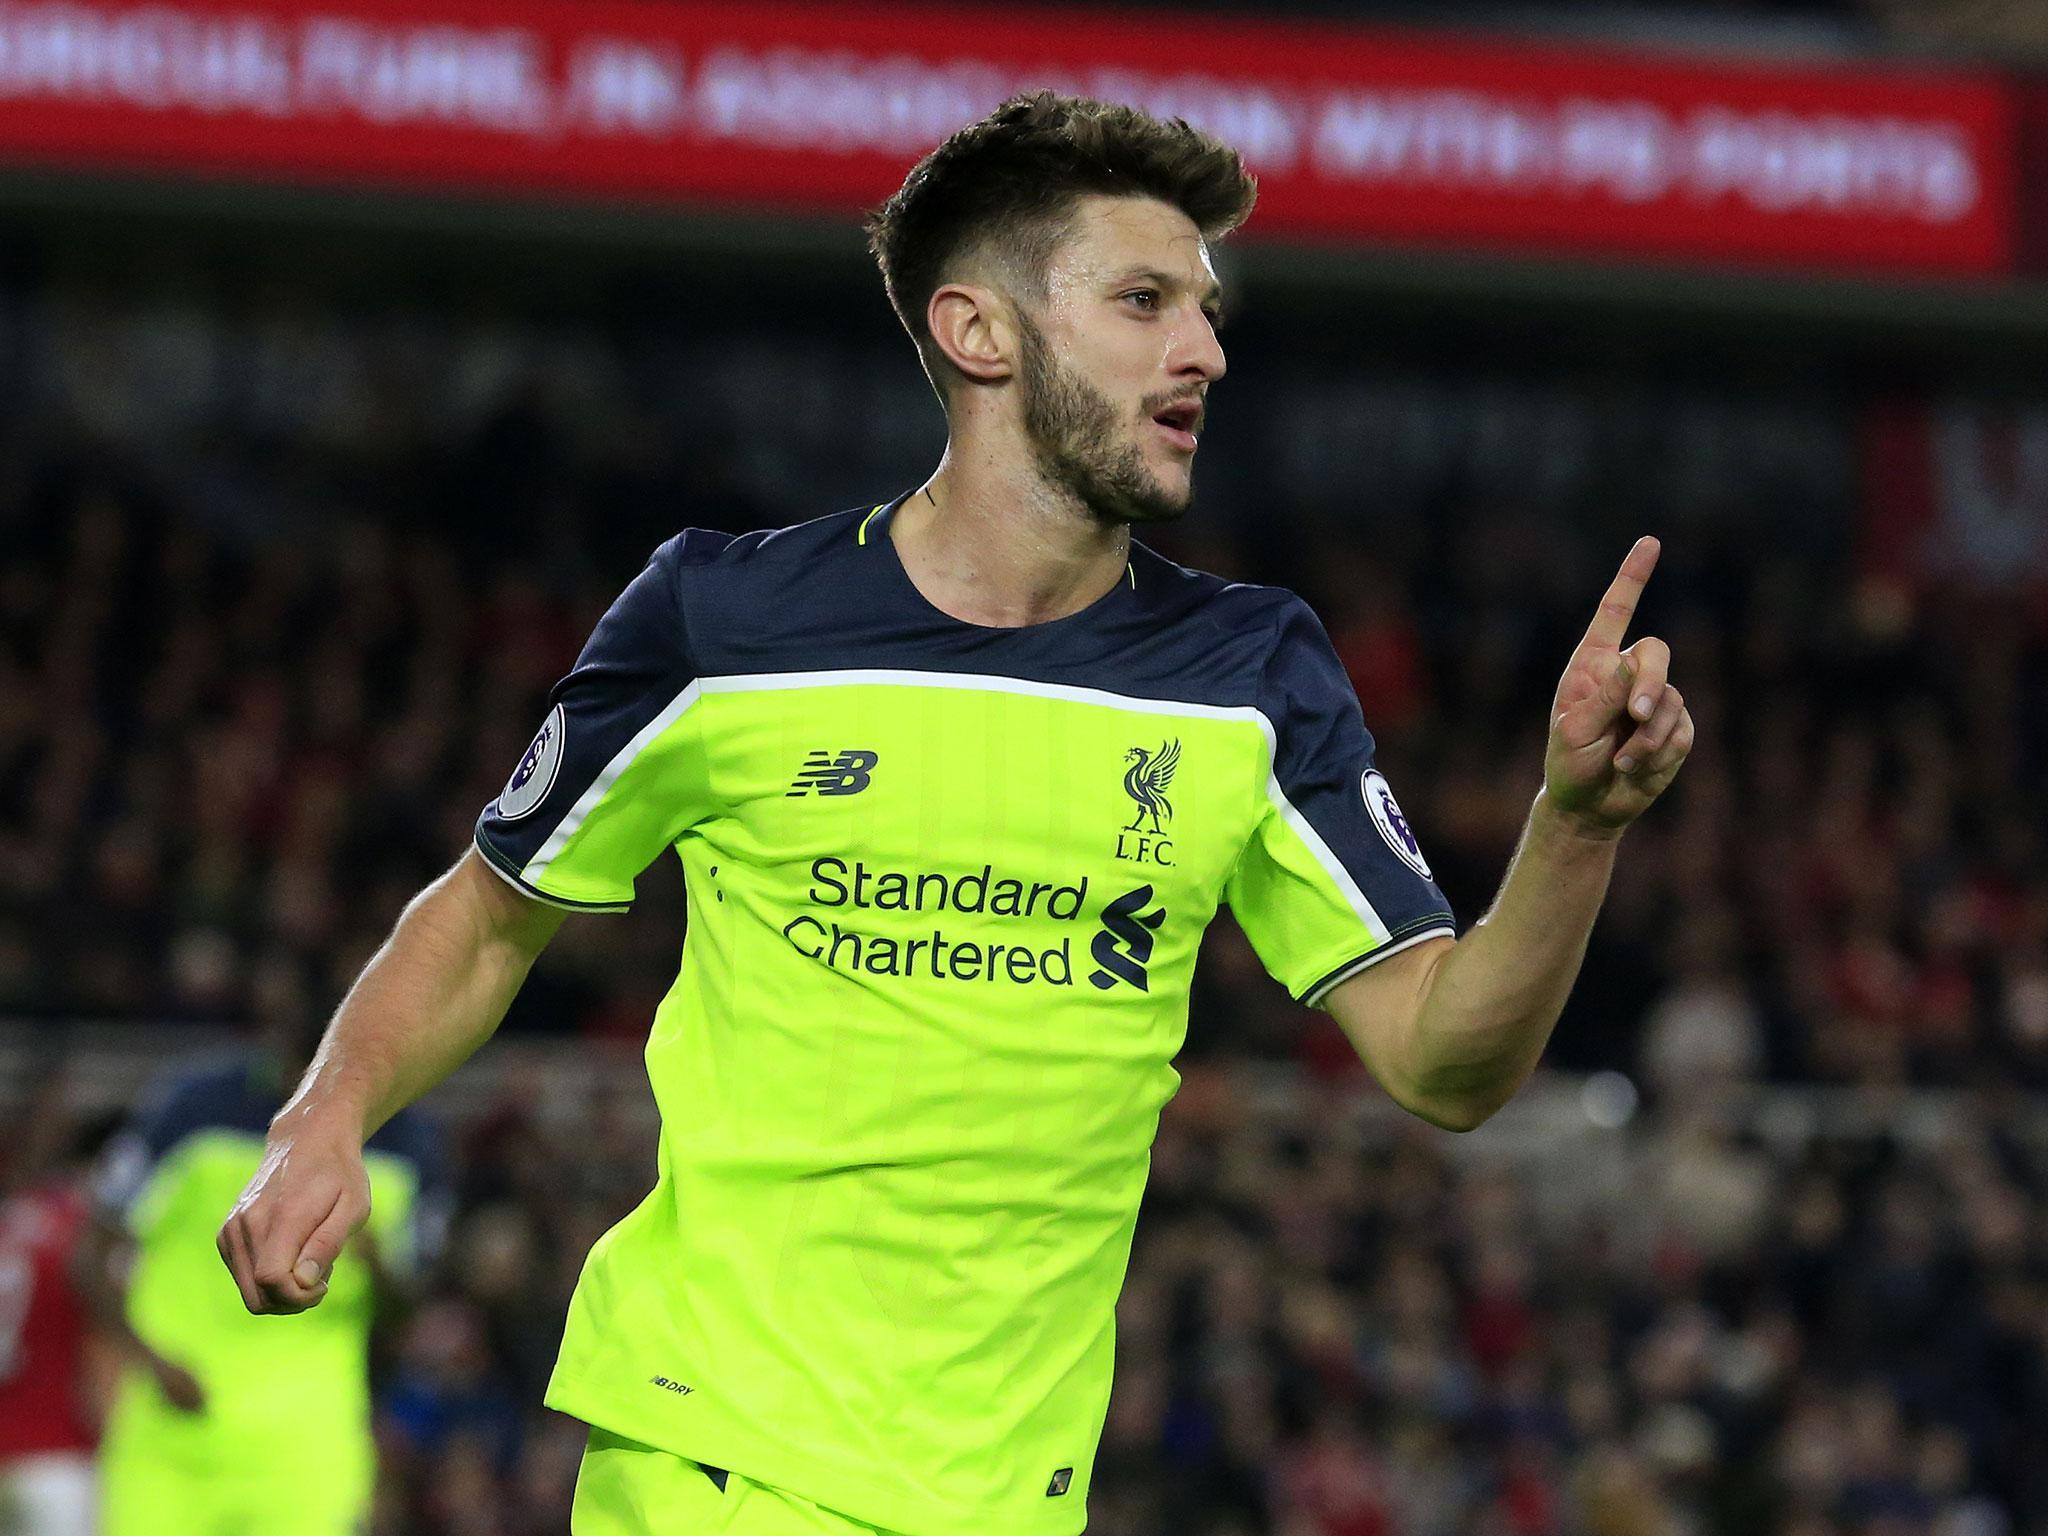 Lallana has impressed for Liverpool this season